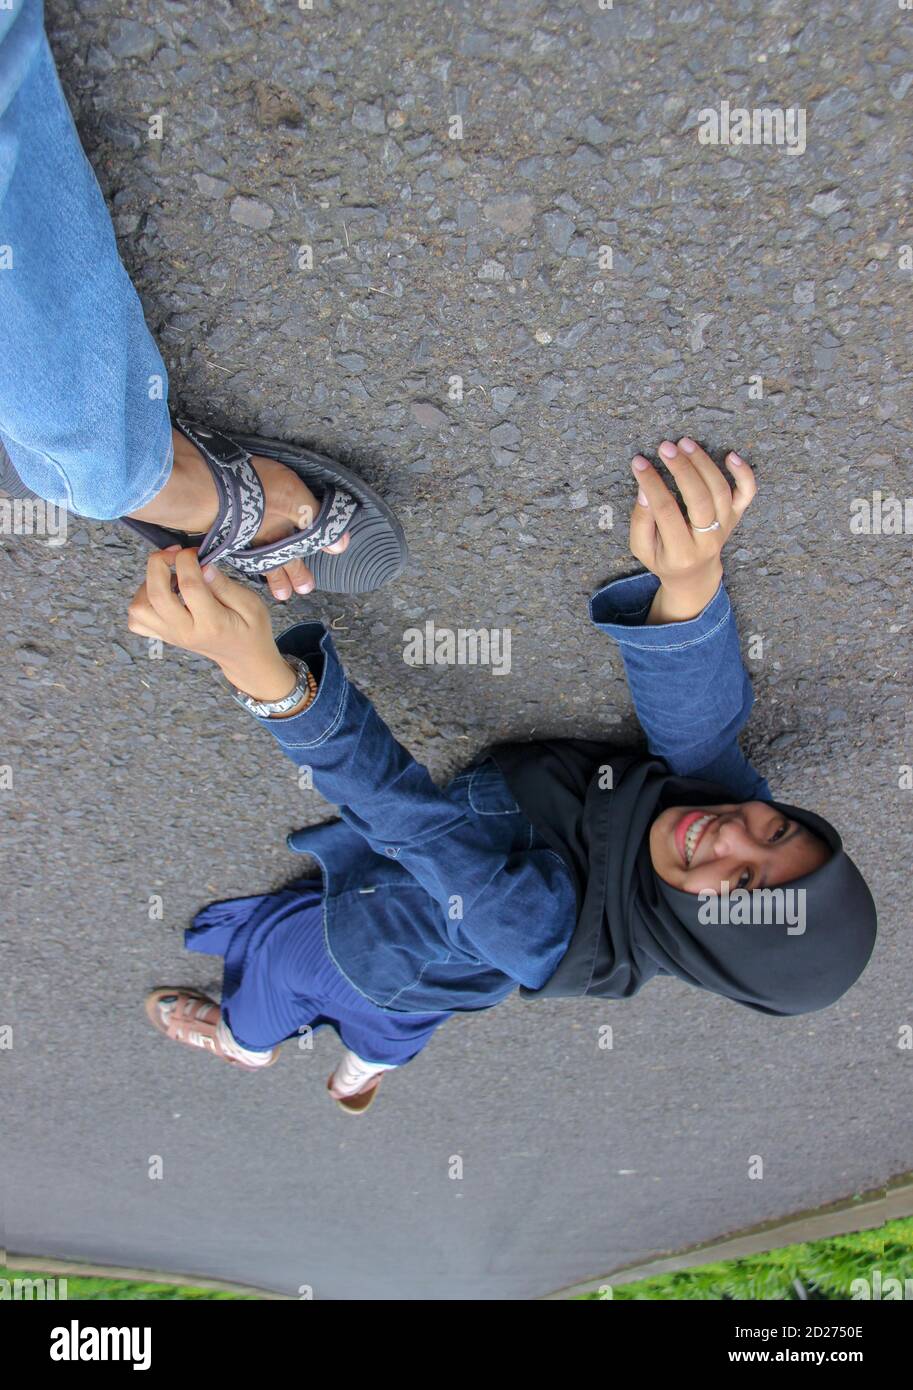 Asian woman portrait of foot grip with cute and creative concept. woman lying on the highway with an expression of happy laughter. Stock Photo